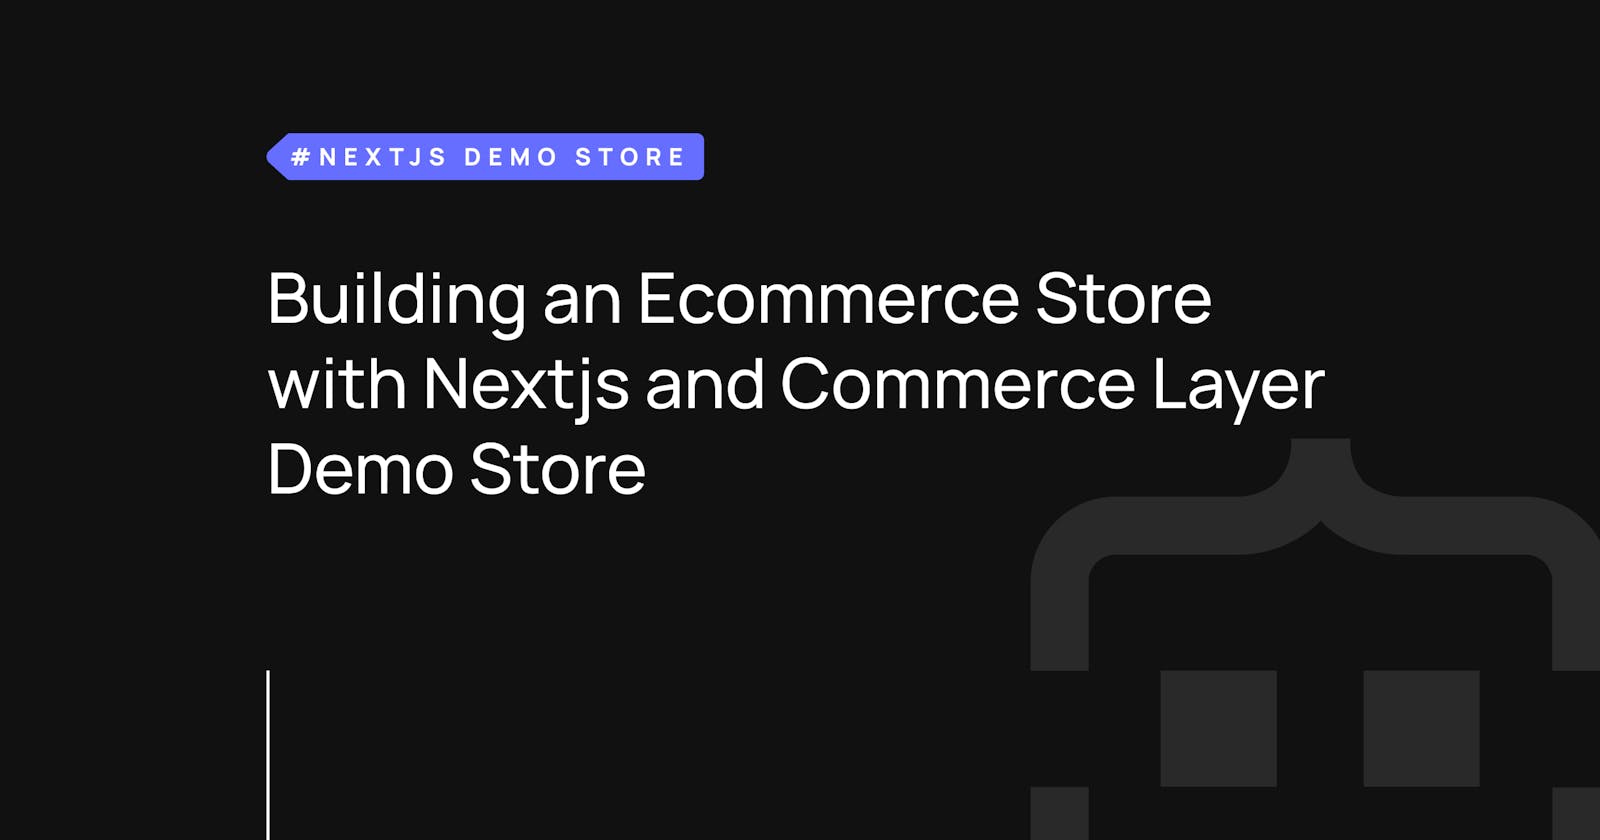 Building an Ecommerce Store with Nextjs and Commerce Layer Demo Store